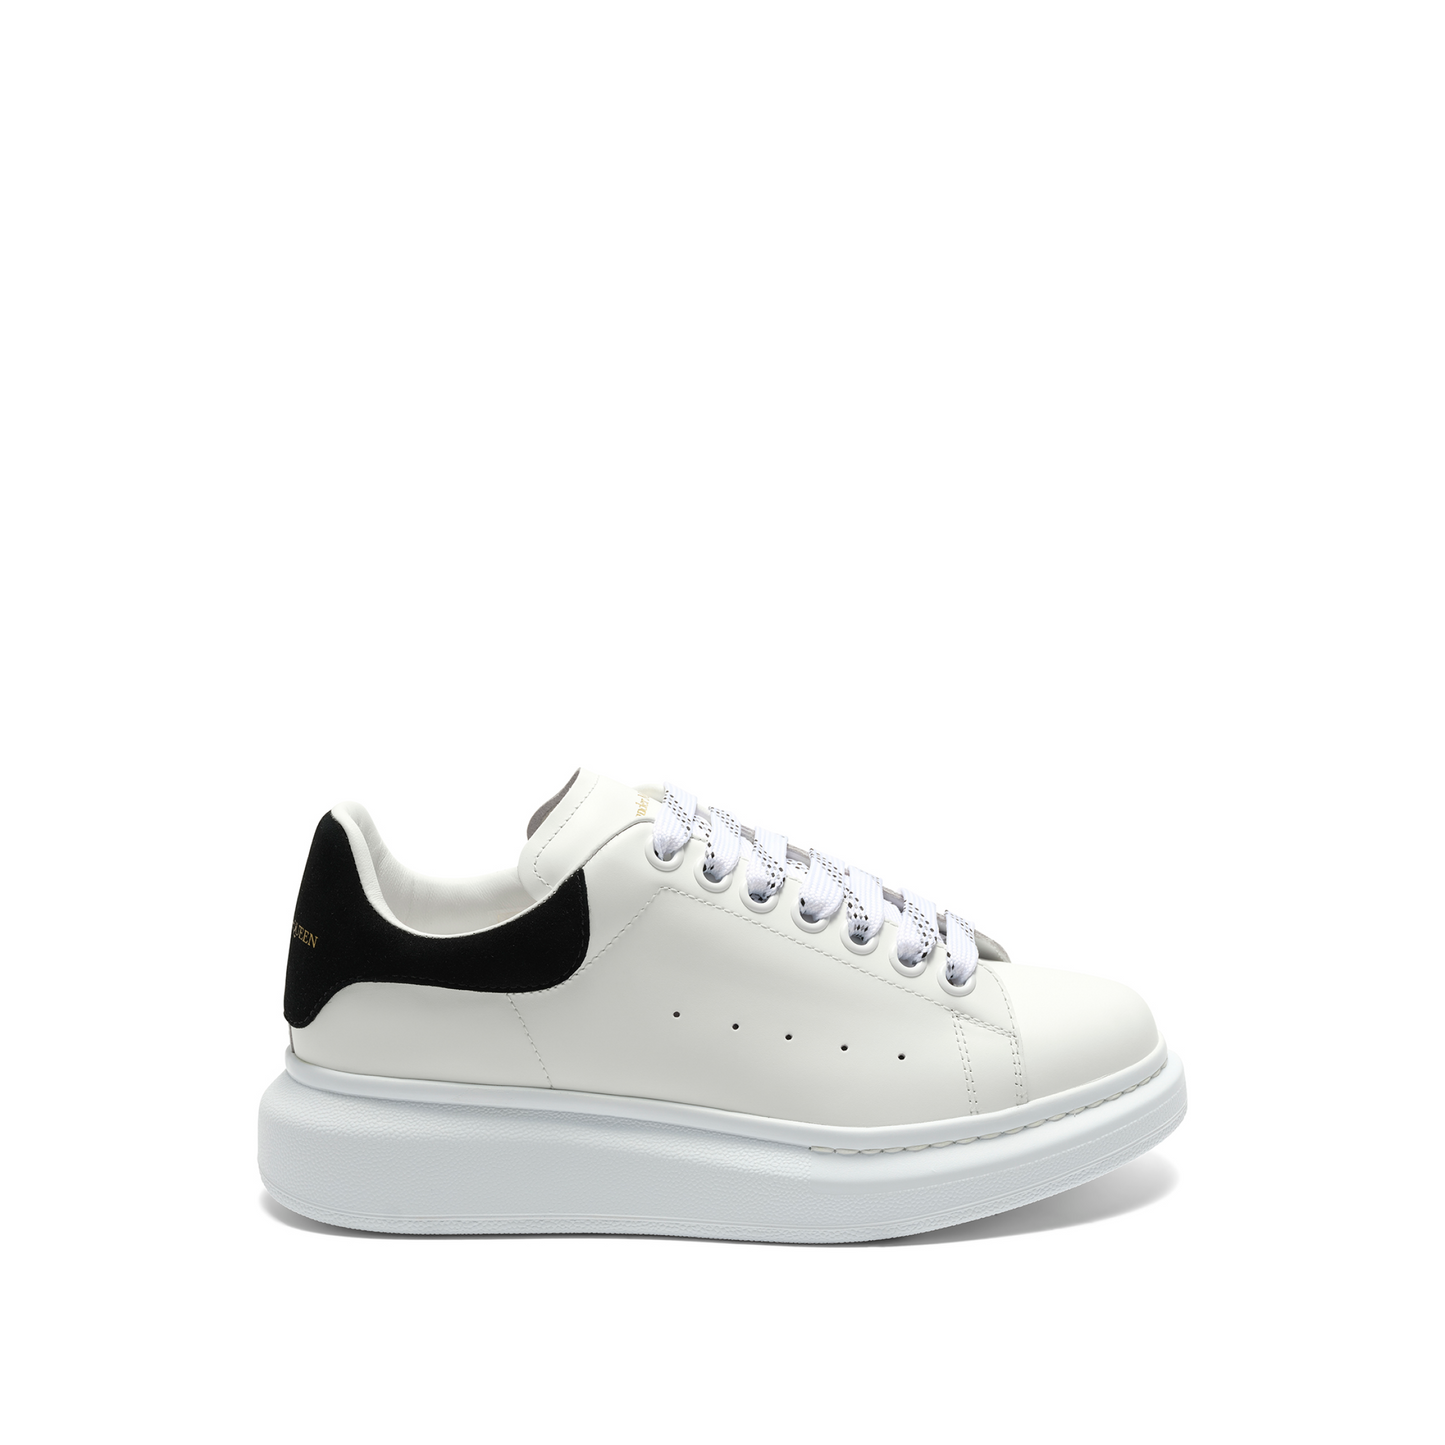 Larry Oversized Sneakers in White/Black Suede